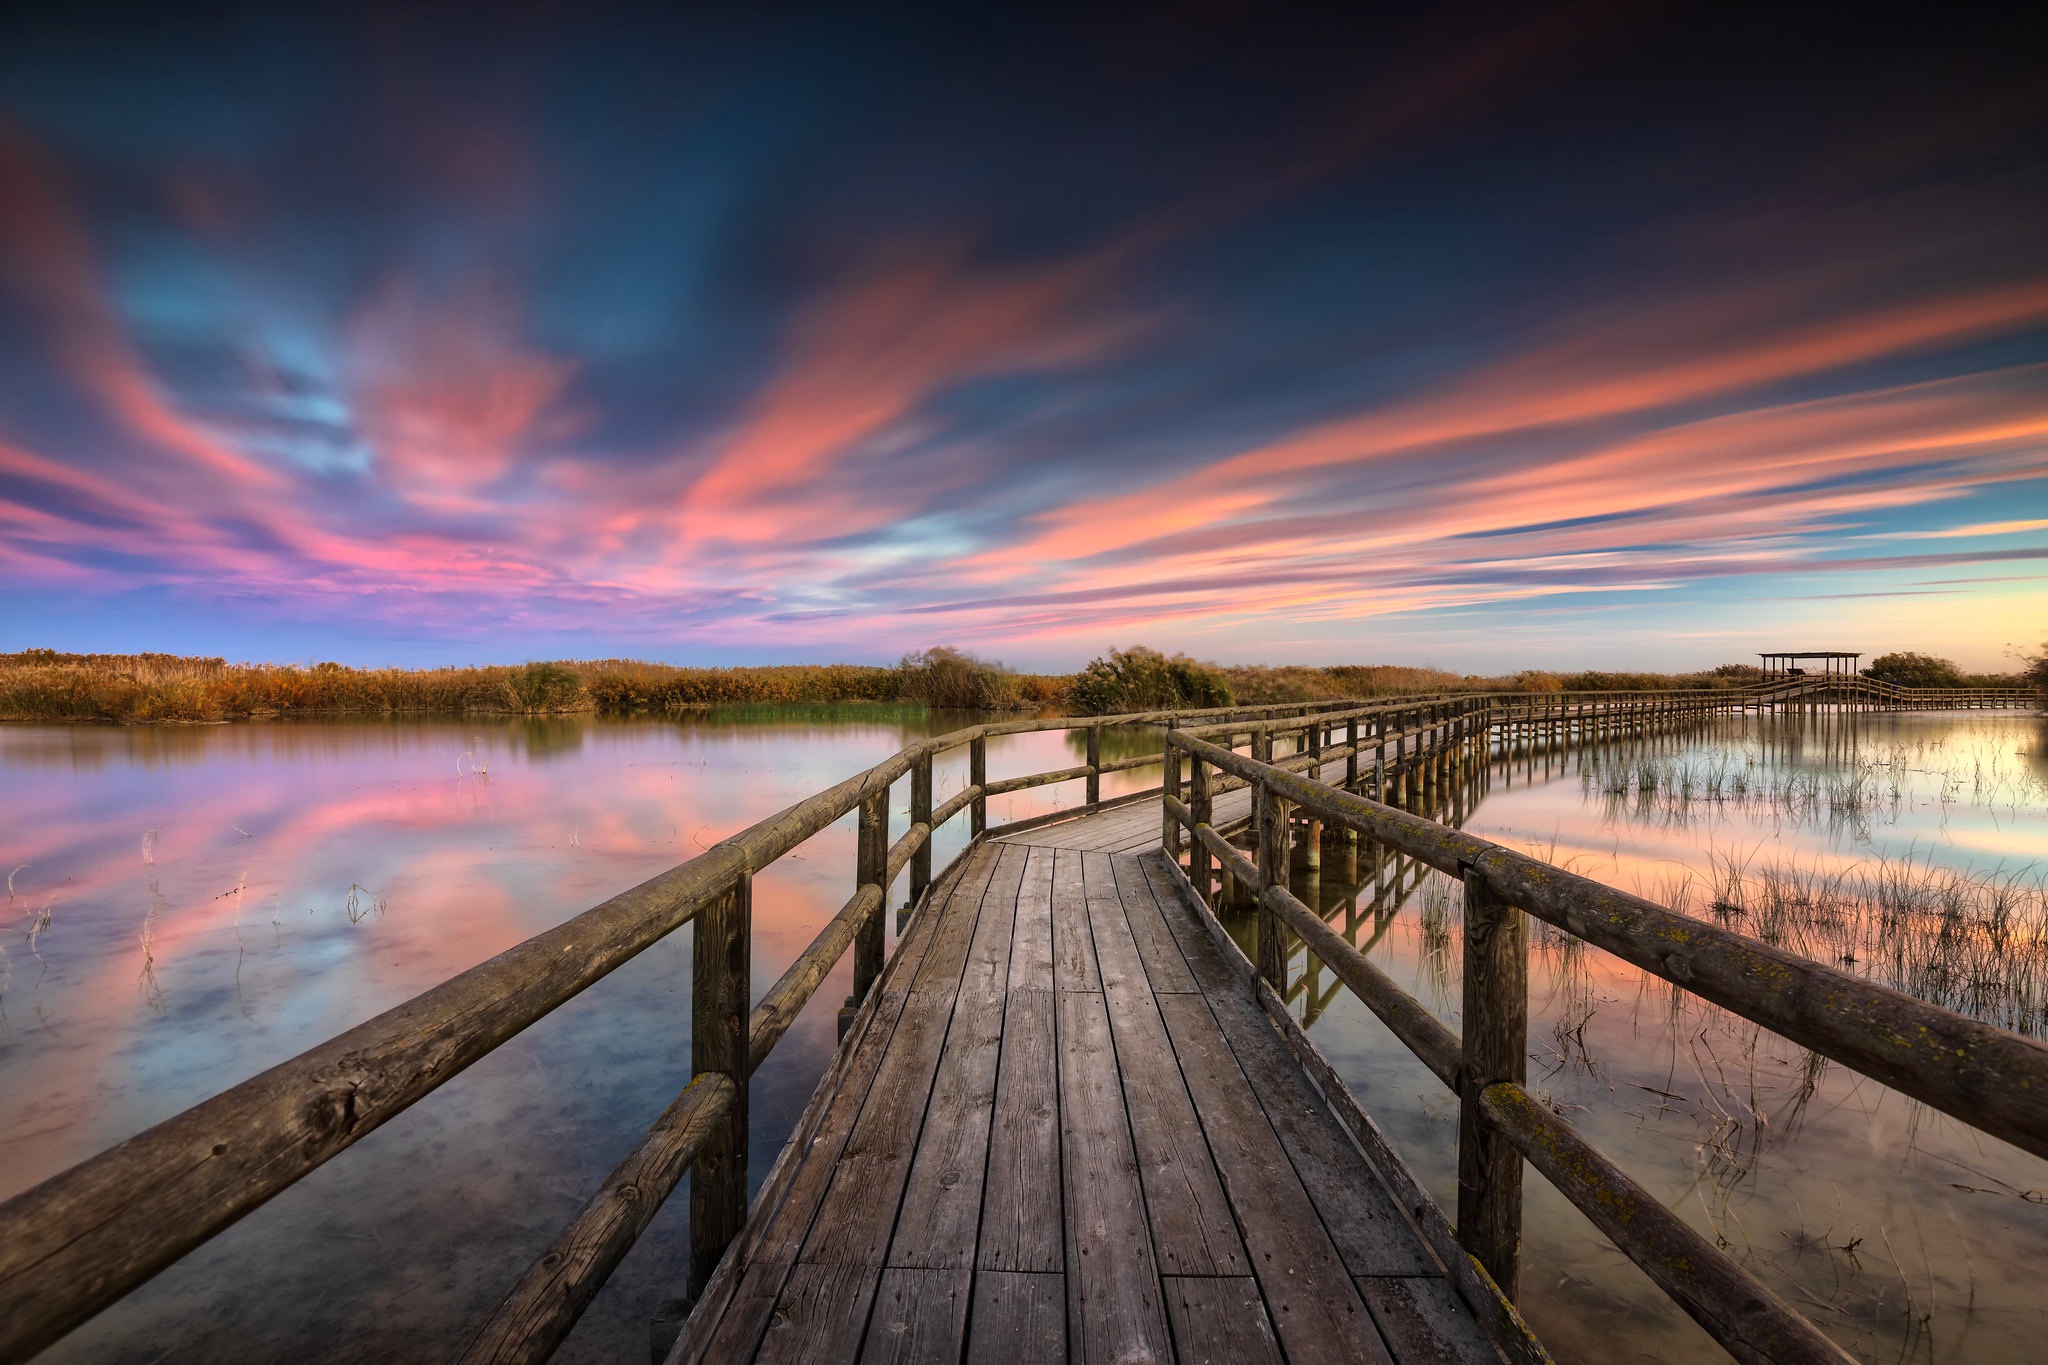 General 2048x1365 sky nature landscape outdoors clouds wooden walkway water